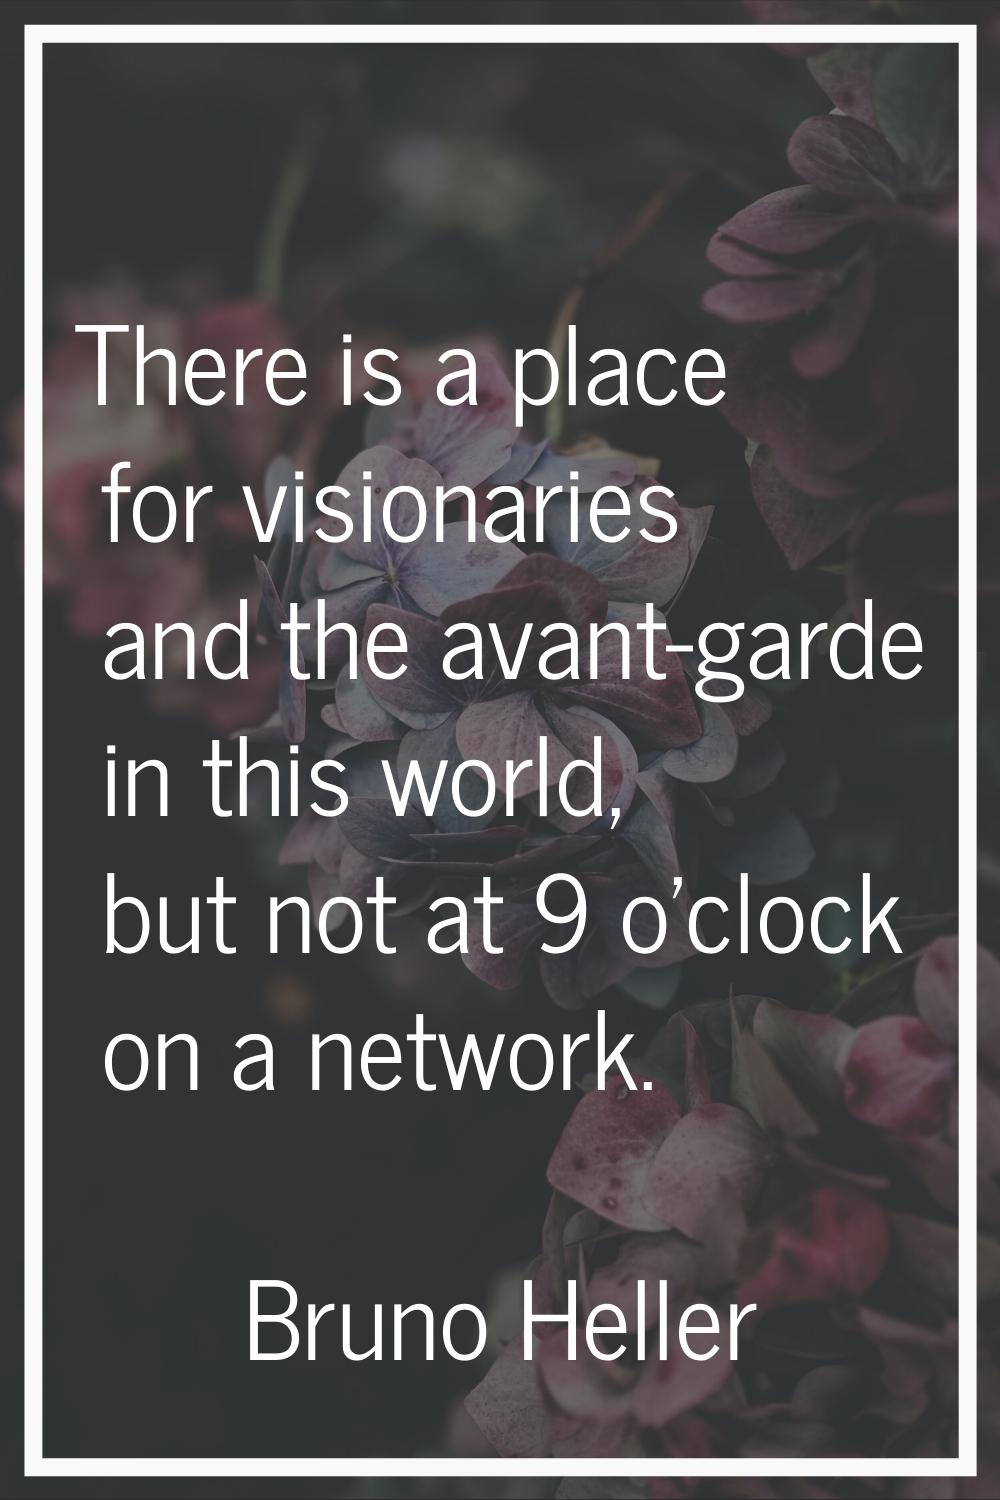 There is a place for visionaries and the avant-garde in this world, but not at 9 o'clock on a netwo